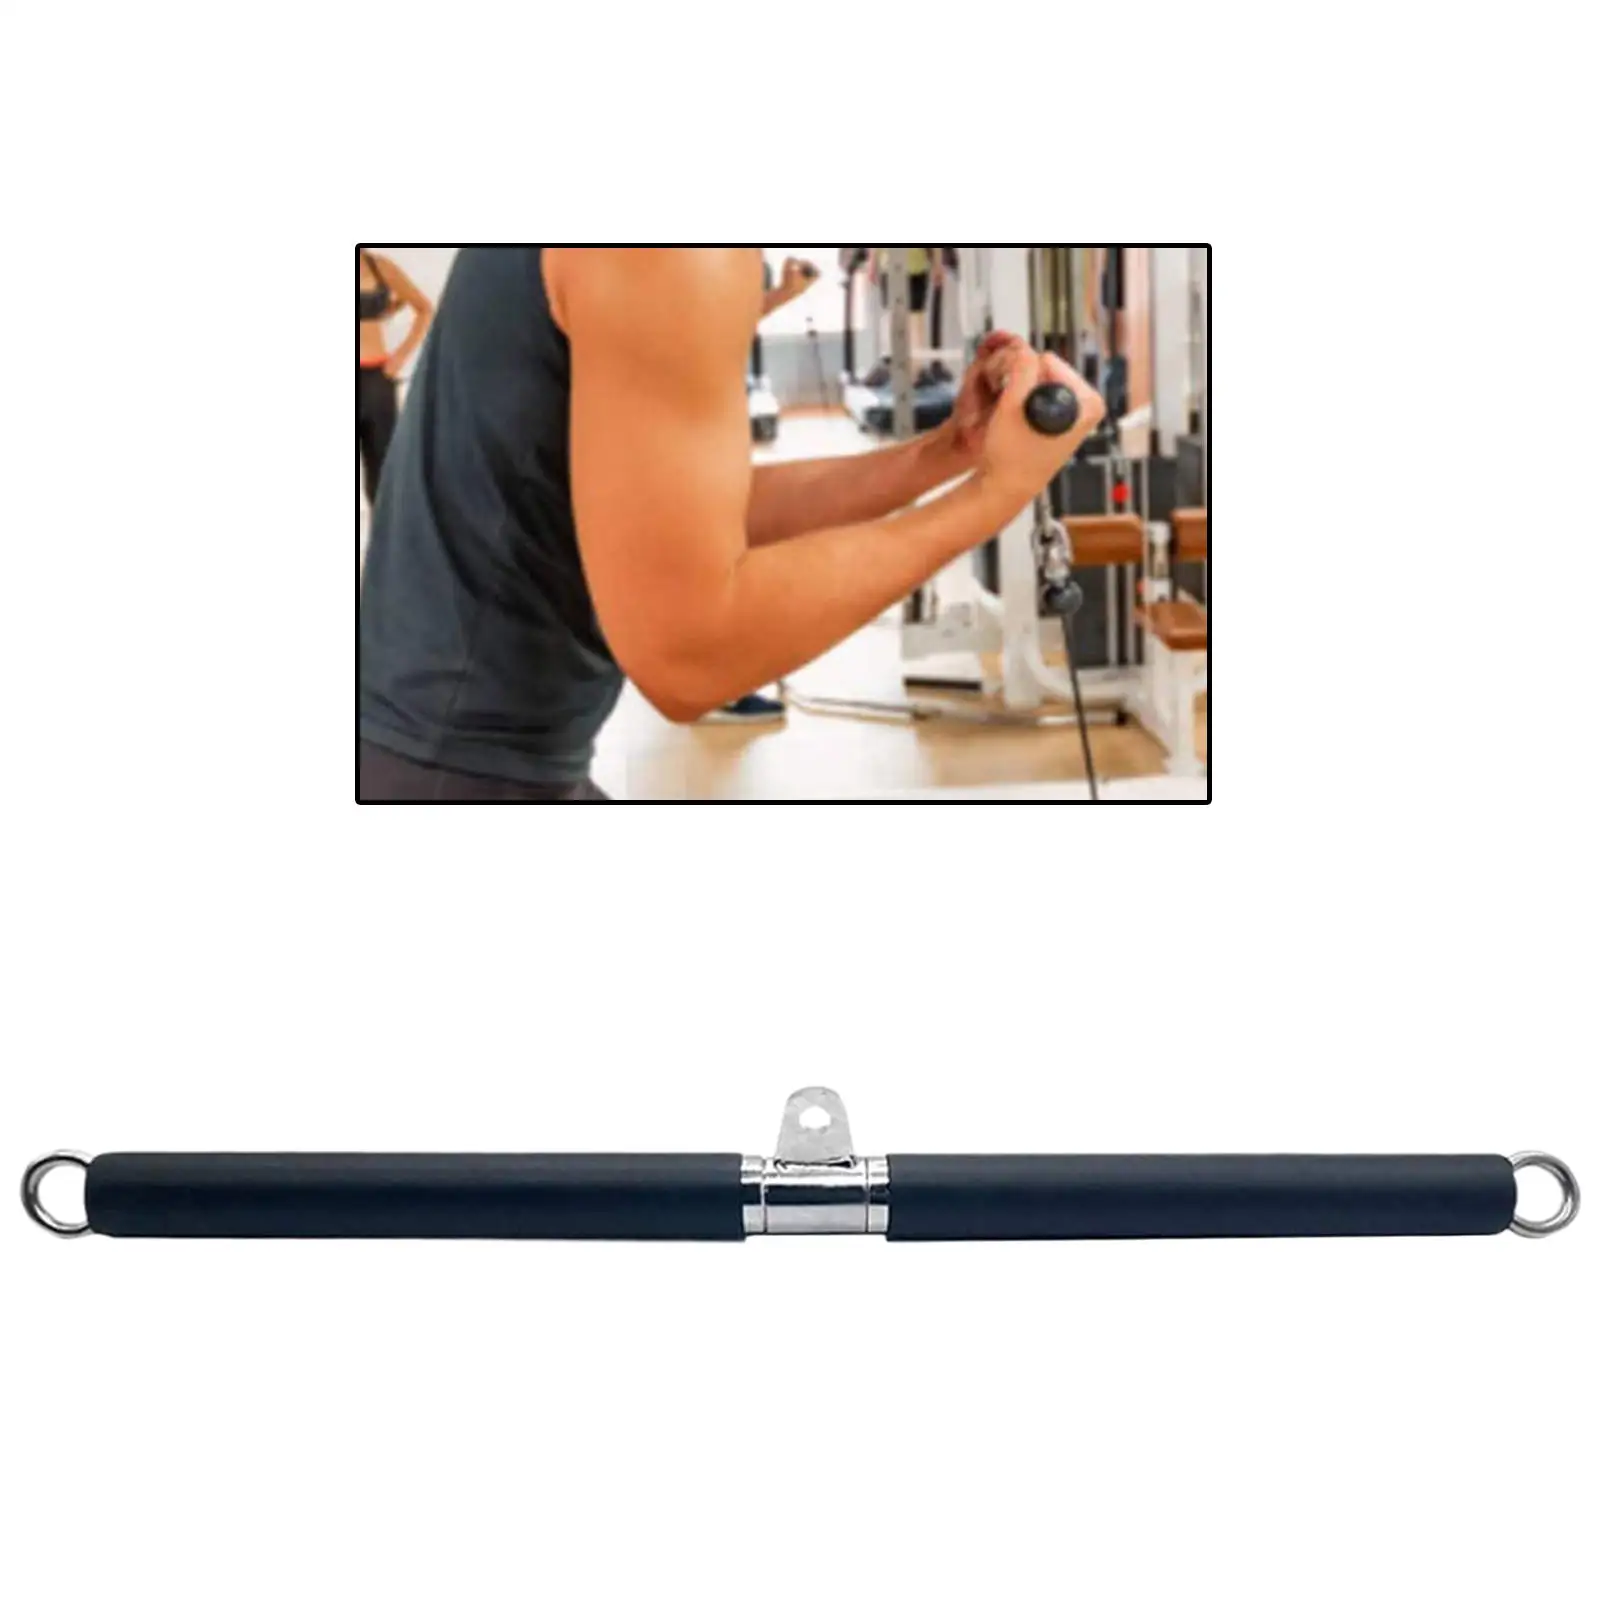 Fitness LAT Pulldown Bar Pull Down Bar Fit for Strength Workout Muscle Building